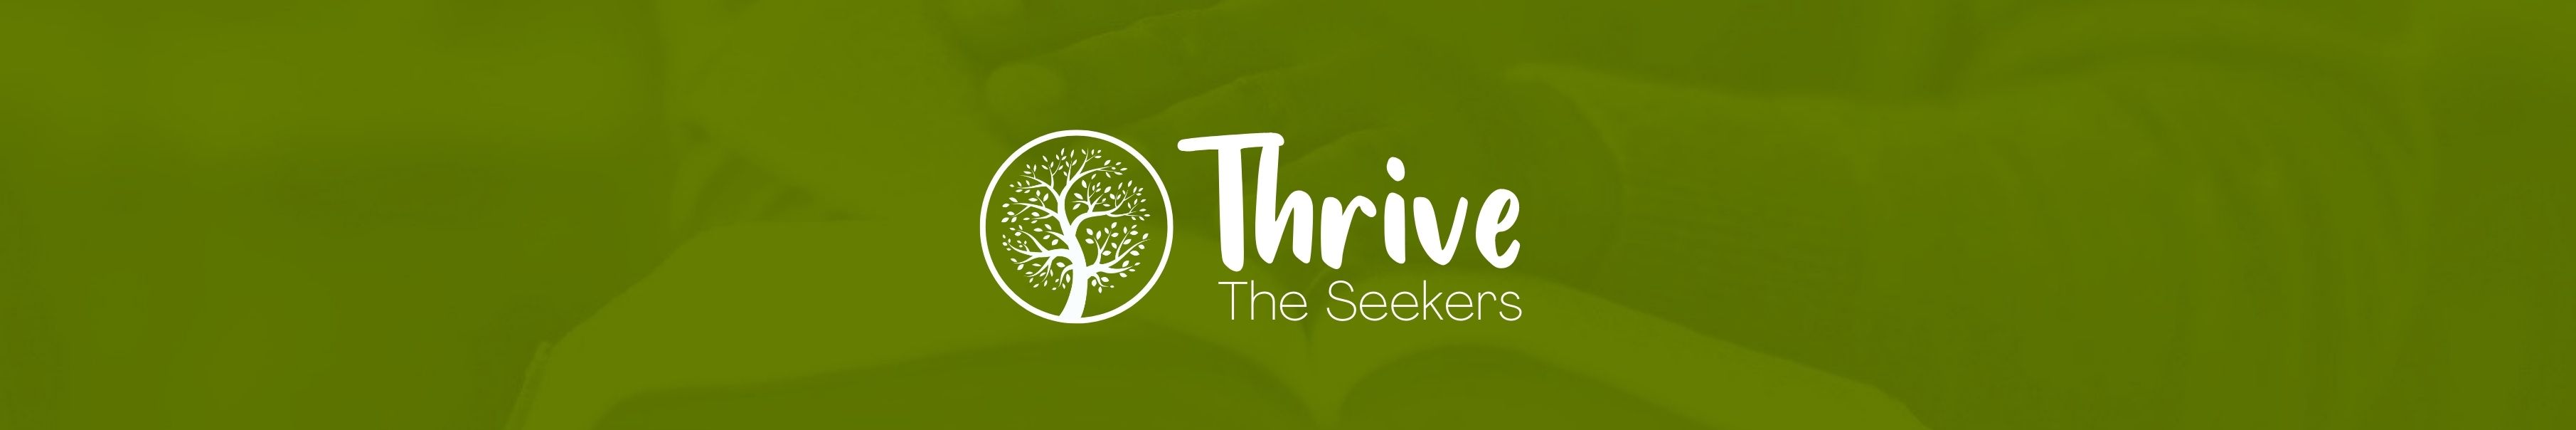 Thrive The Seekers